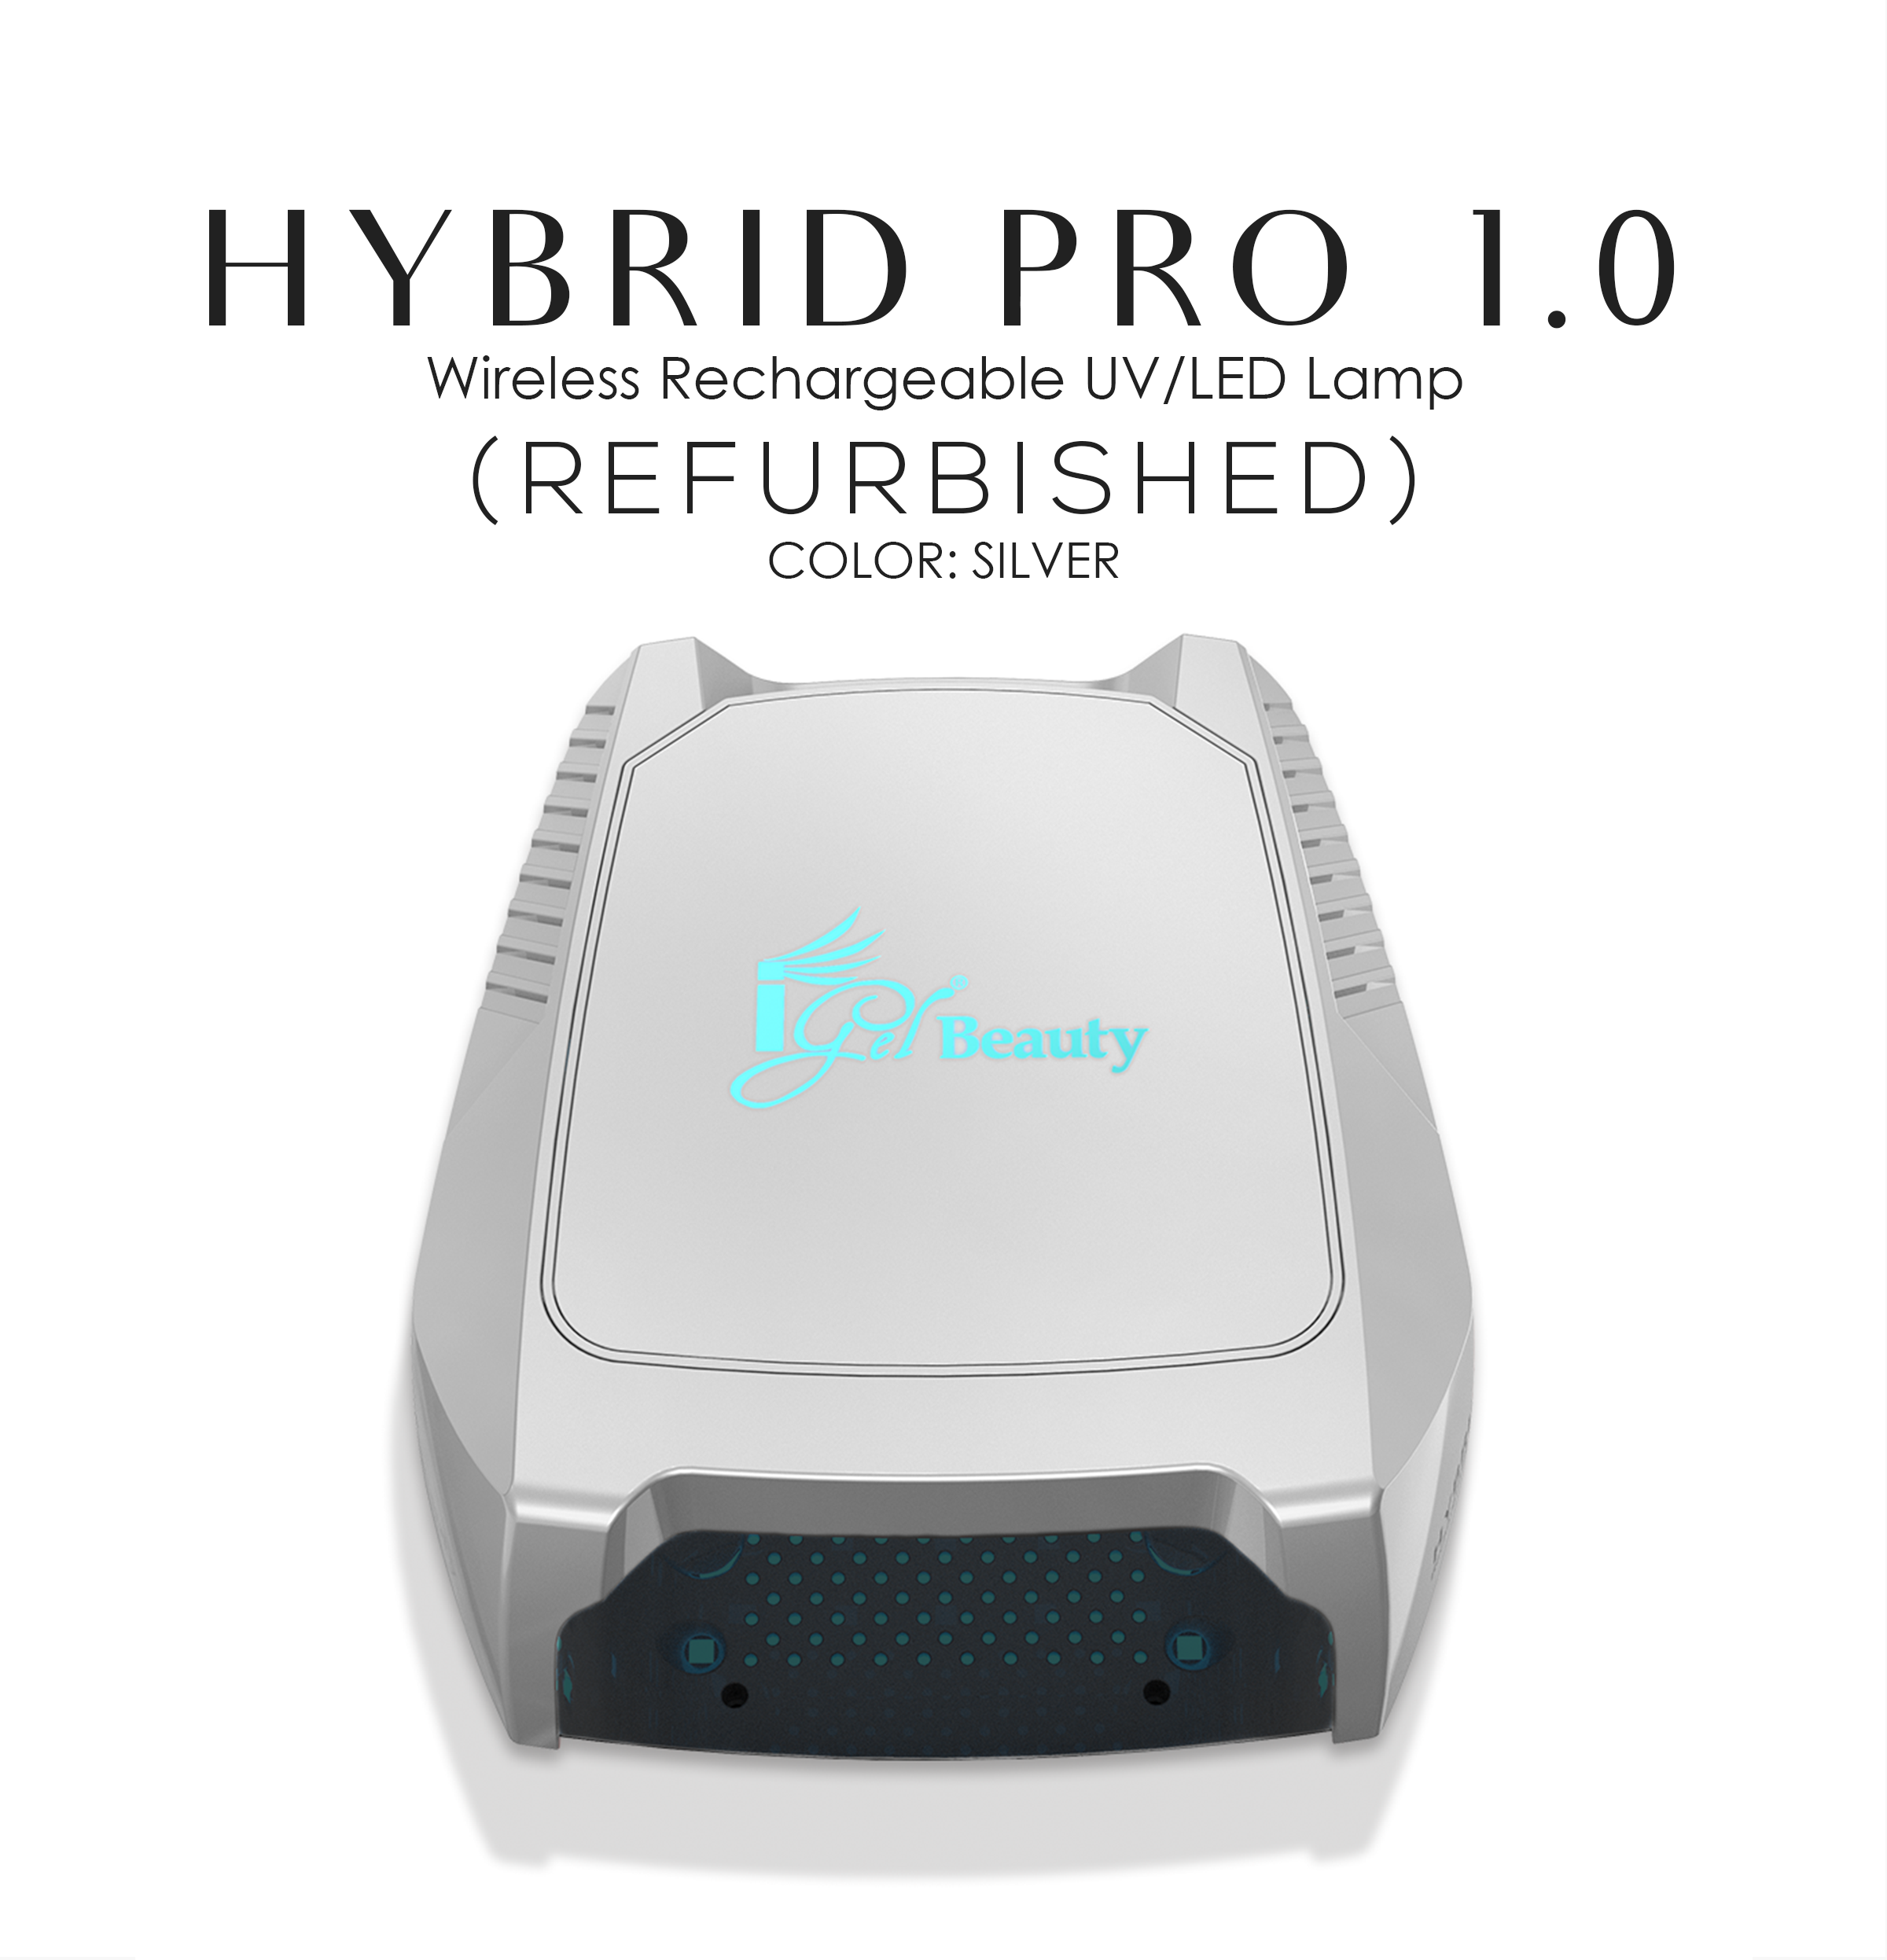 REFURBISHED - HYBRID PRO 1.0 Wireless Rechargeable UV/LED Lamp SILVER